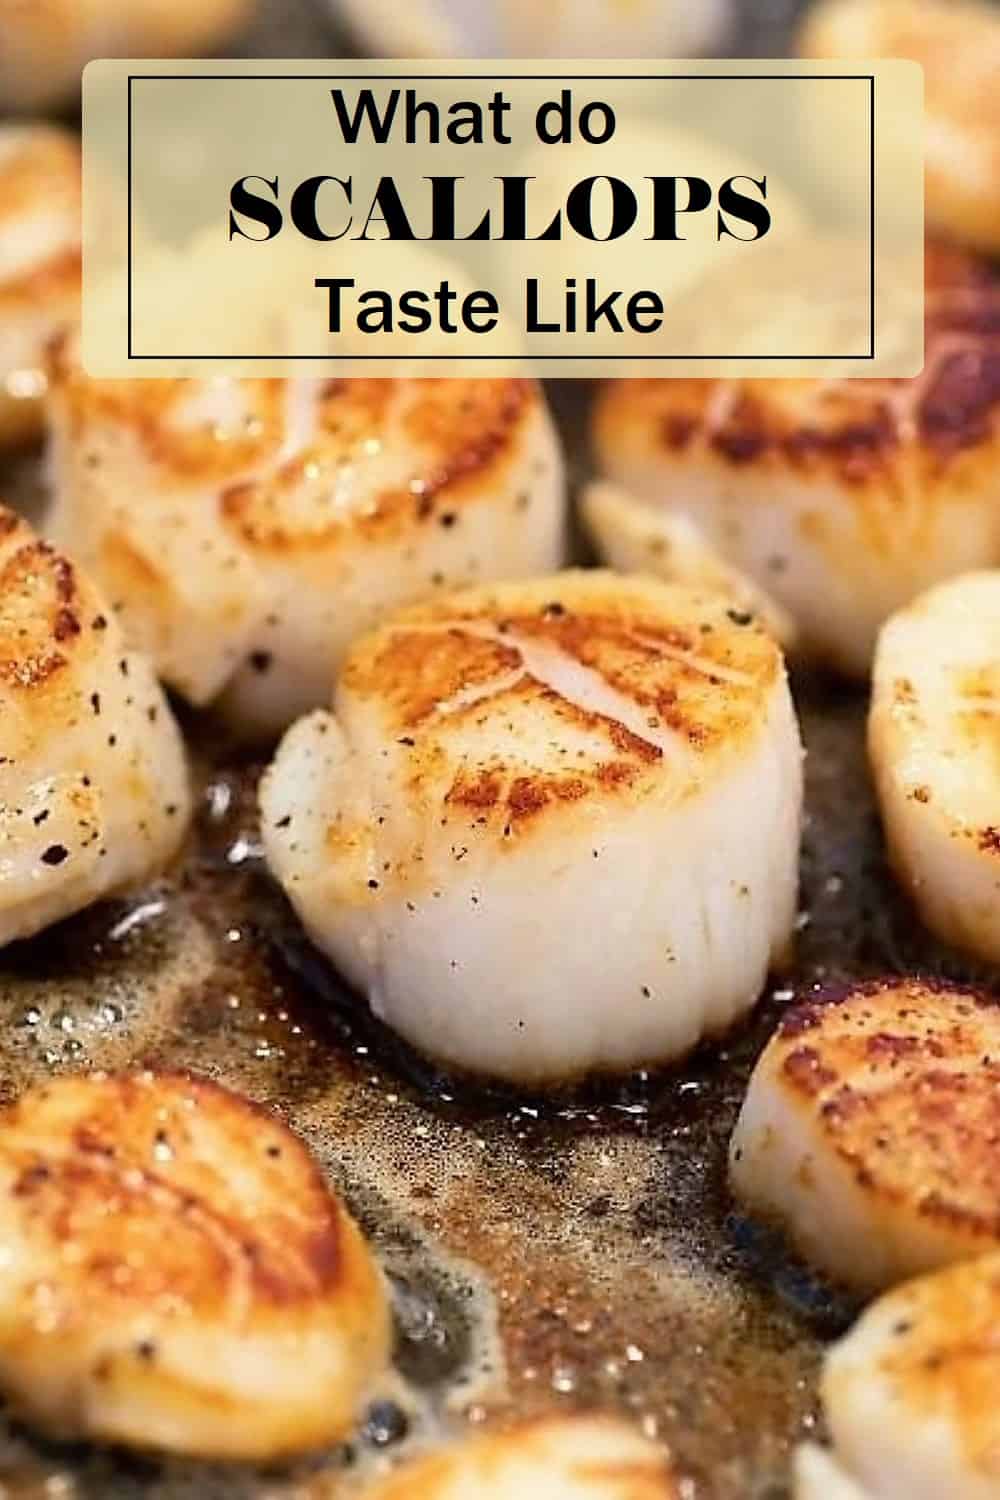 scallops in their shells